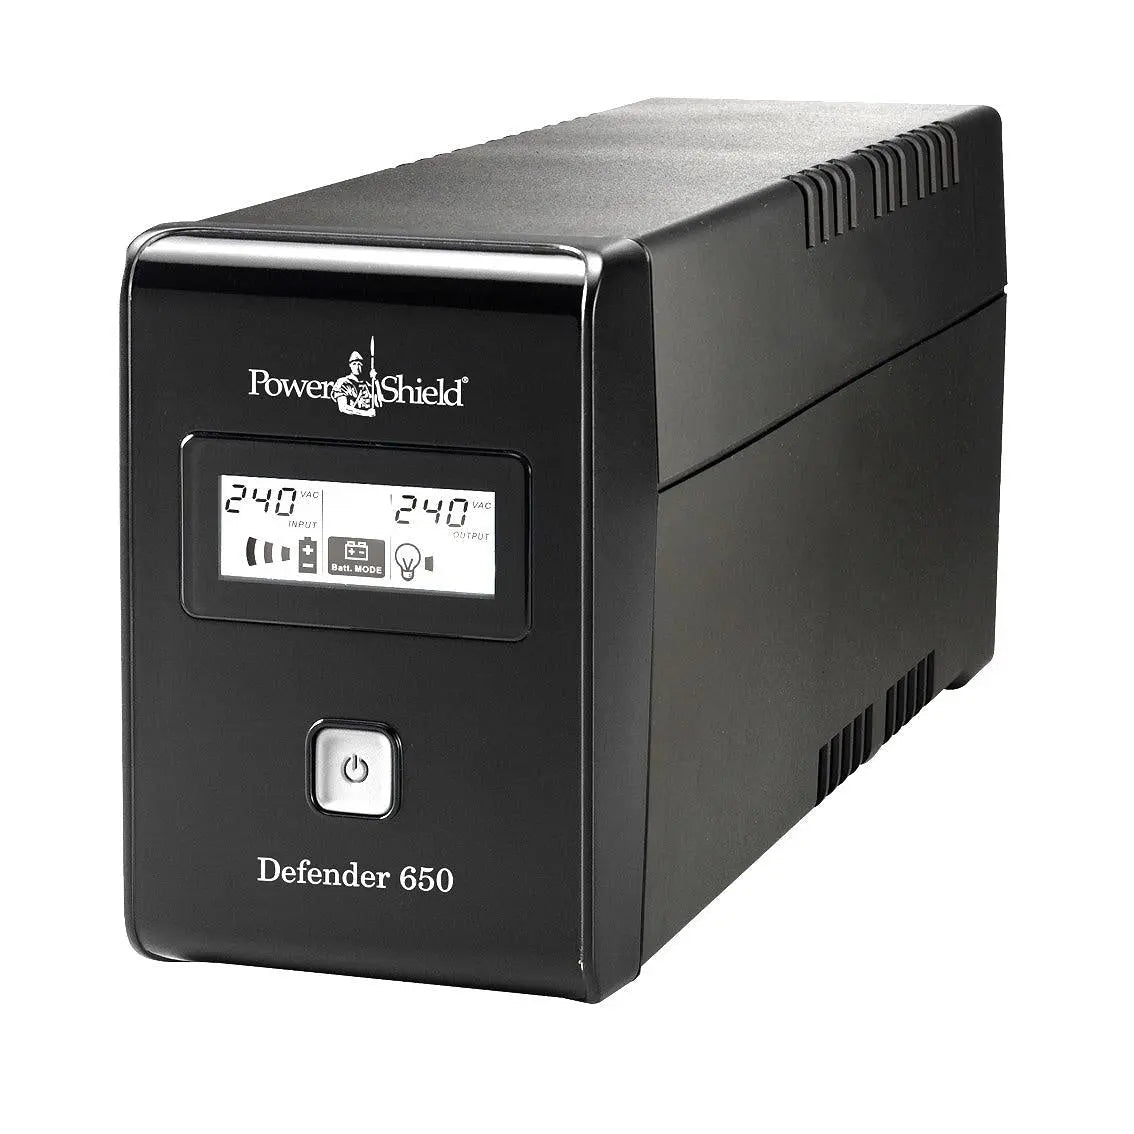 POWERSHIELD Defender 650VA / 390W Line Interactive UPS with AVR, Australian Outlets and user replaceable batteries POWERSHIELD